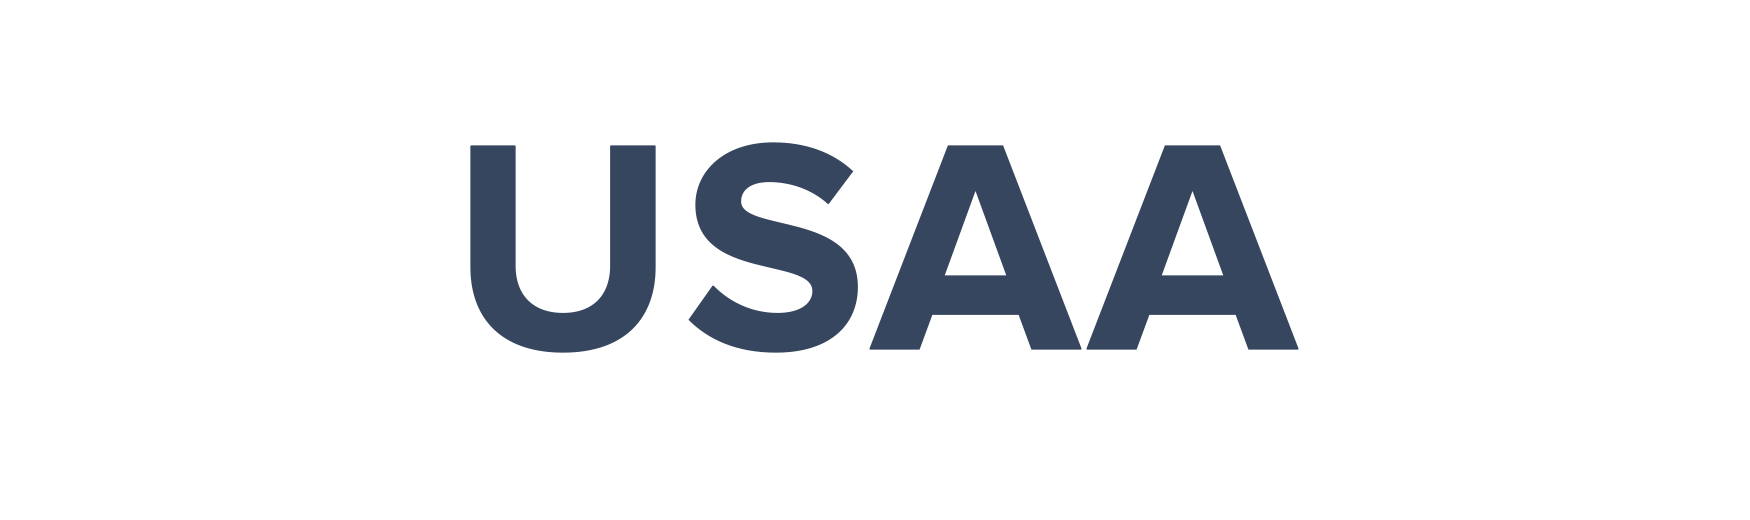 USAA credit cards